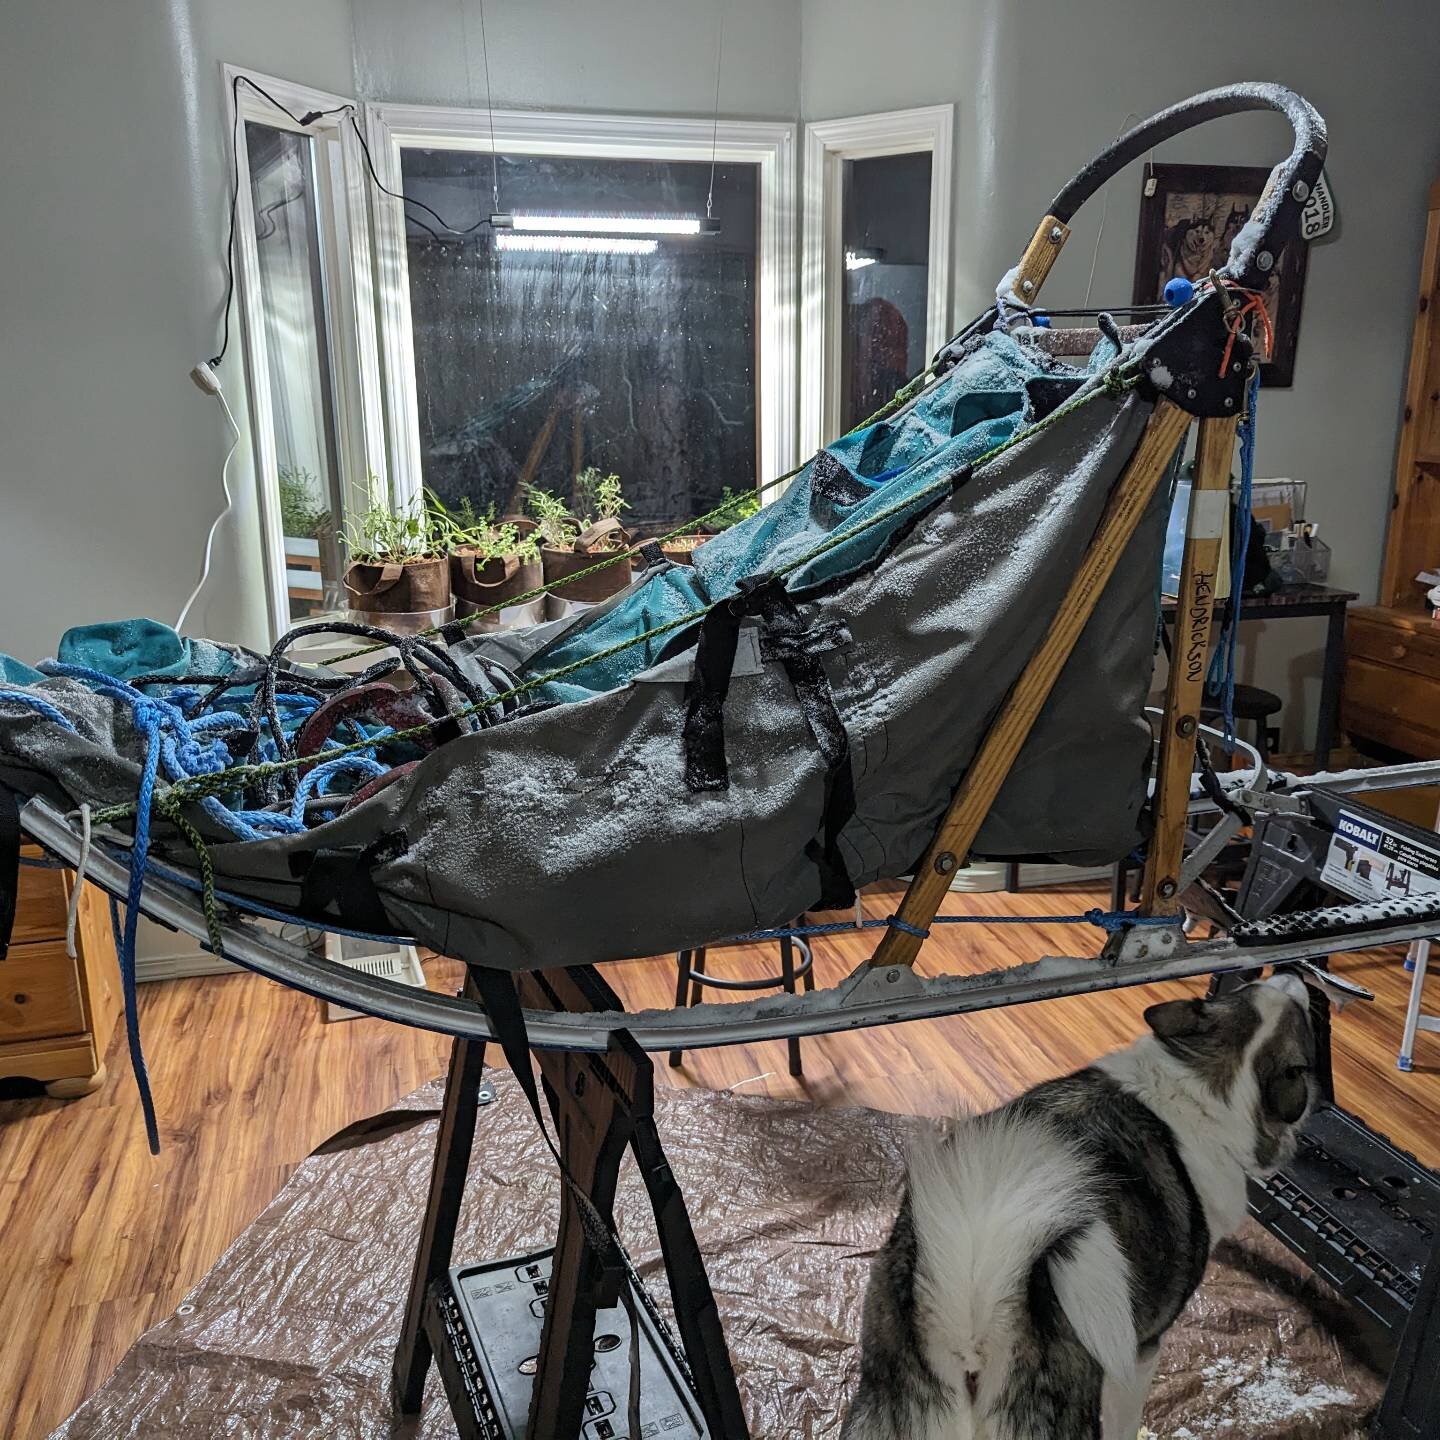 Big things are happening! After about 5 (6?) seasons of using @ataokennel 's spare sled I finally have my own! It's a little bit of a fixer-upper but should be good to go for the Solstice Invitational next weekend after Pepper finishes inspecting.